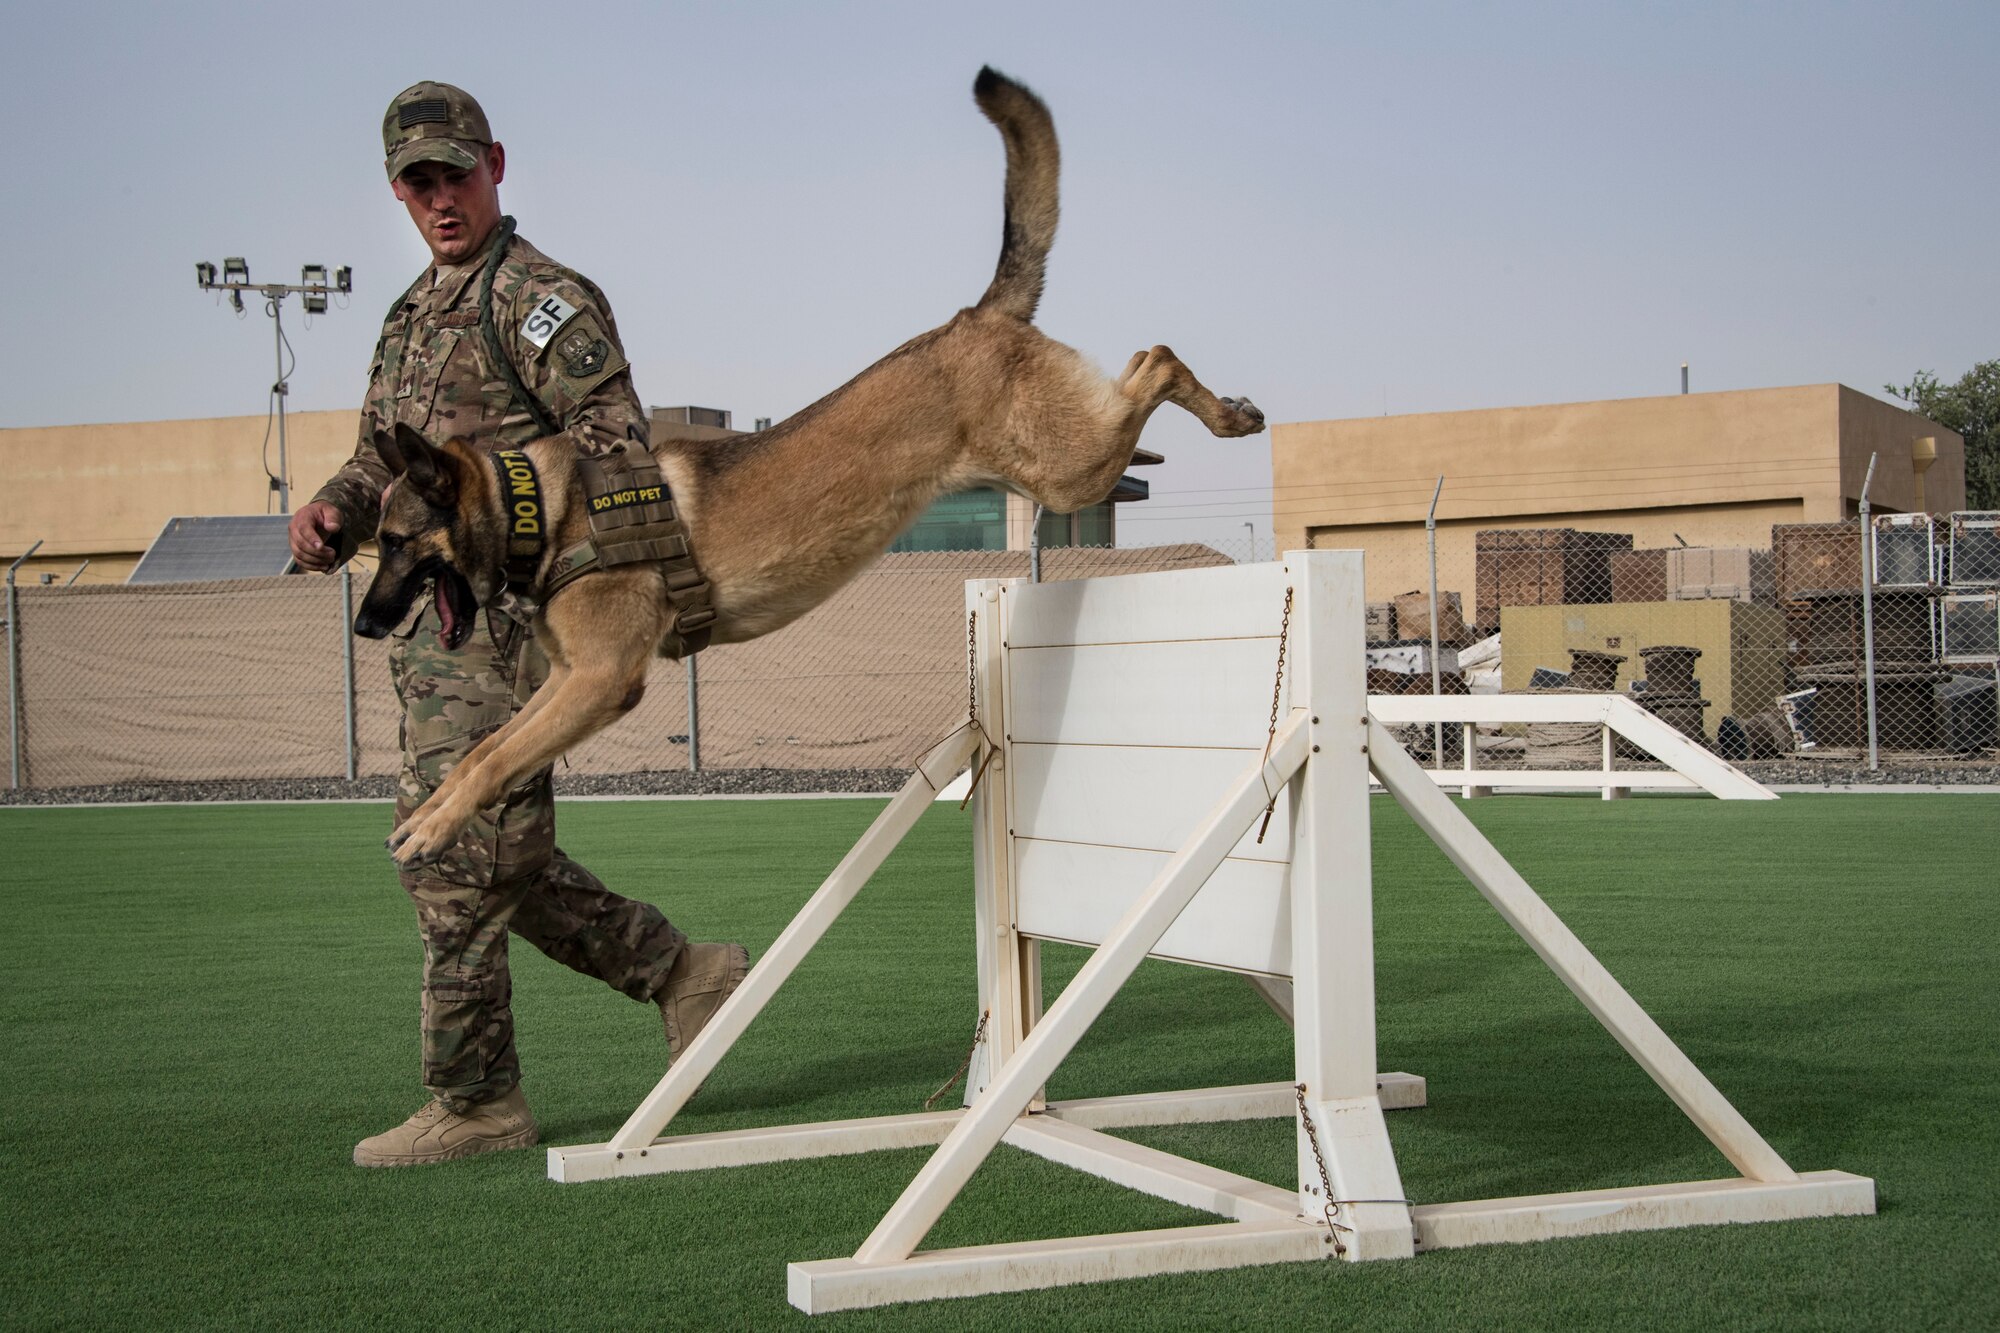 U.S. Air Force Staff Sgt. Cody Howey, 380th Security Forces Squadron military working dog han-dler and his K-9 partner, Eros, navigate an obstacle during a warm-up exercise to prepare Eros for patrol duty on Al Dhafra Air Base, United Arab Emirates, May 14, 2018. (U.S. Air National Guard photo by Tech. Sgt. Nieko Carzis)